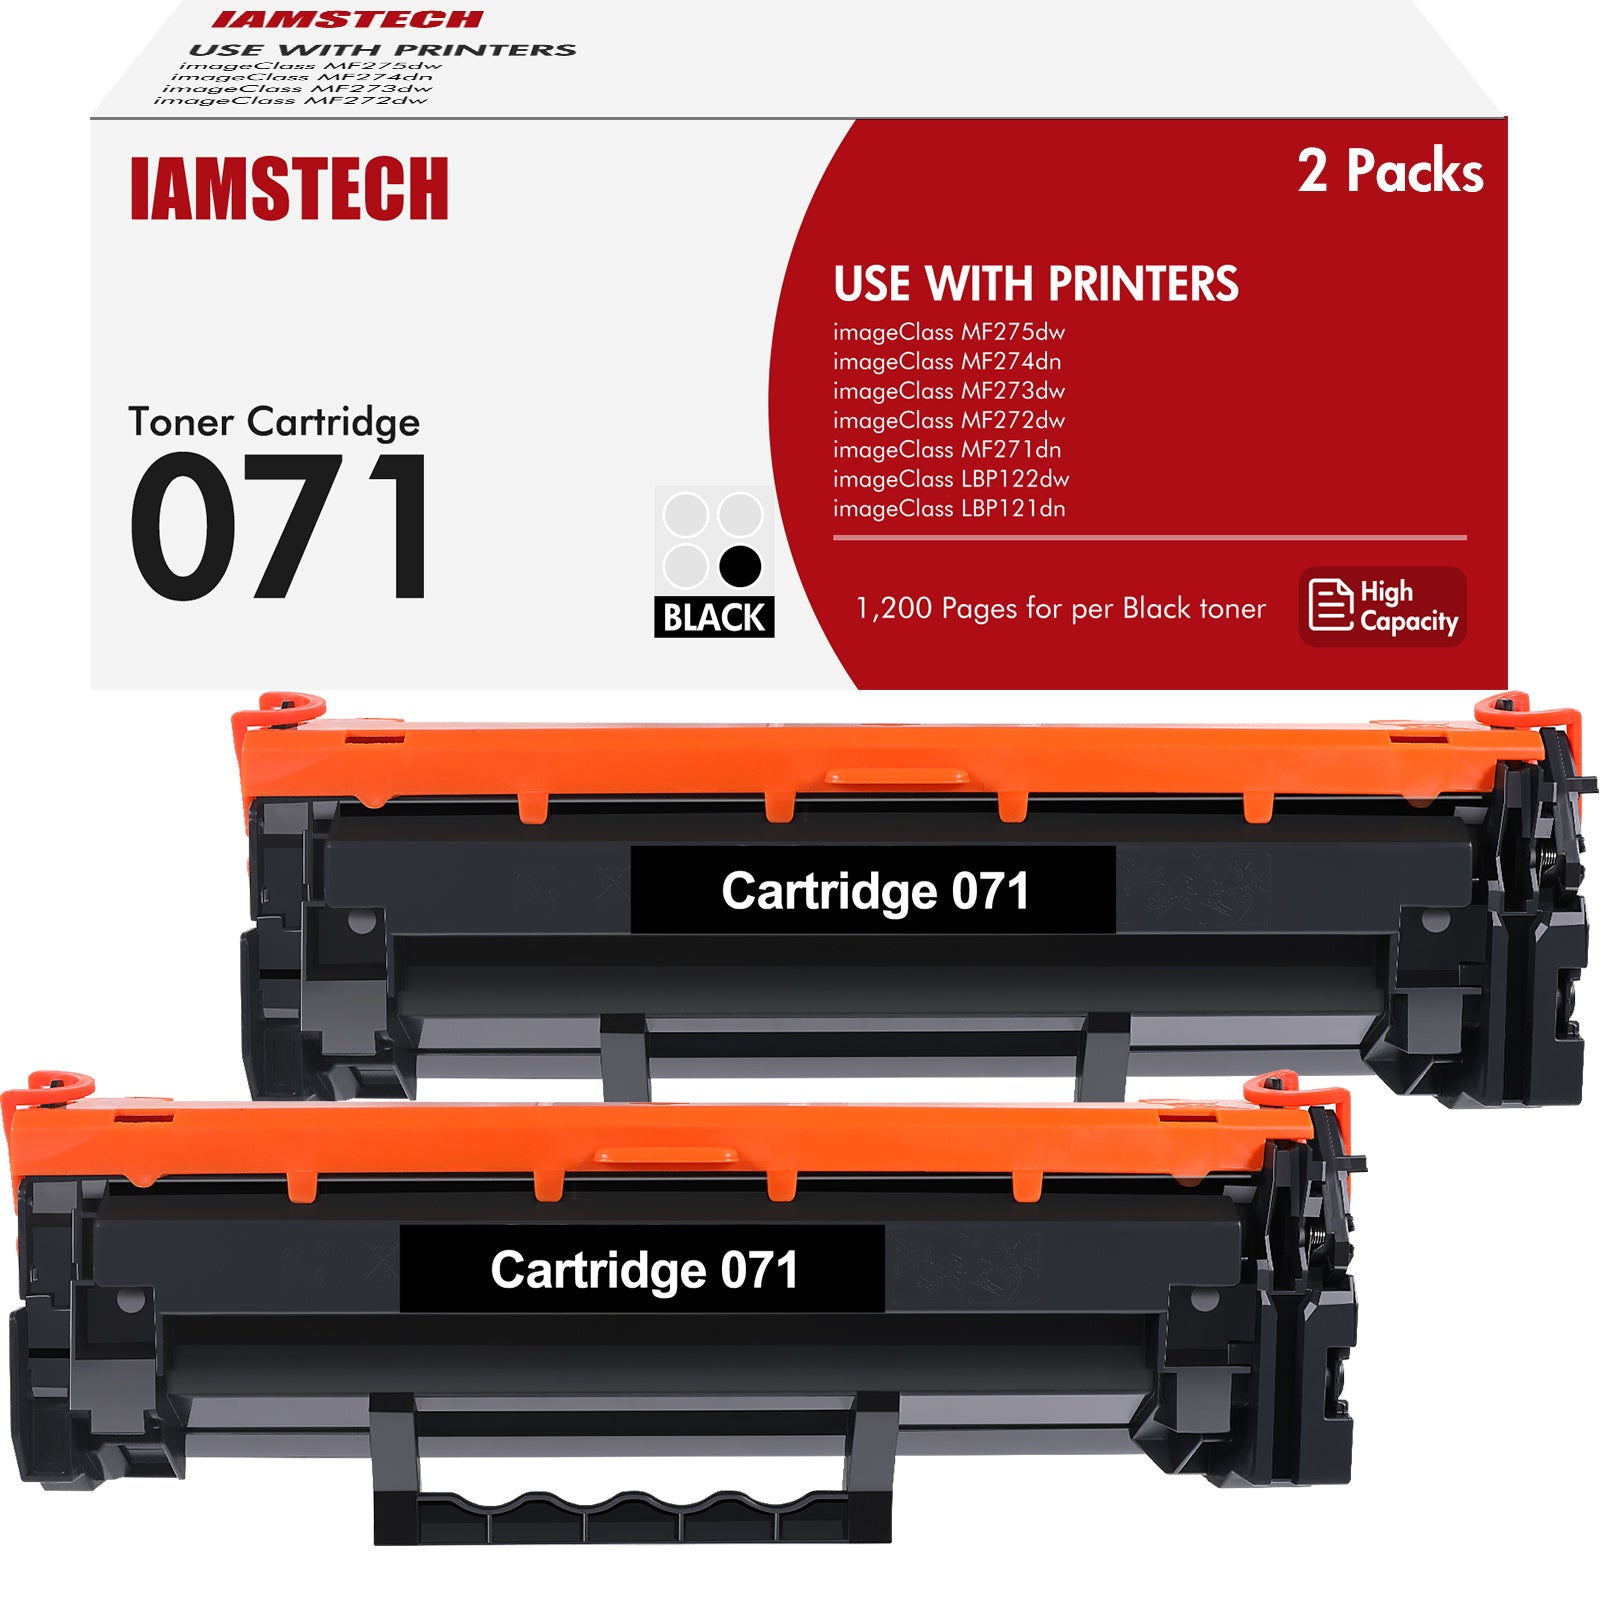 071 071H Toner Cartridge with Chip Compatible for Canon CRG-071 CRG-071H i-SENSYS LBP122dw MF272dw MF273dw MF275dw MF274dn MF271dn LBP121dn Printer (Black,2-Pack)